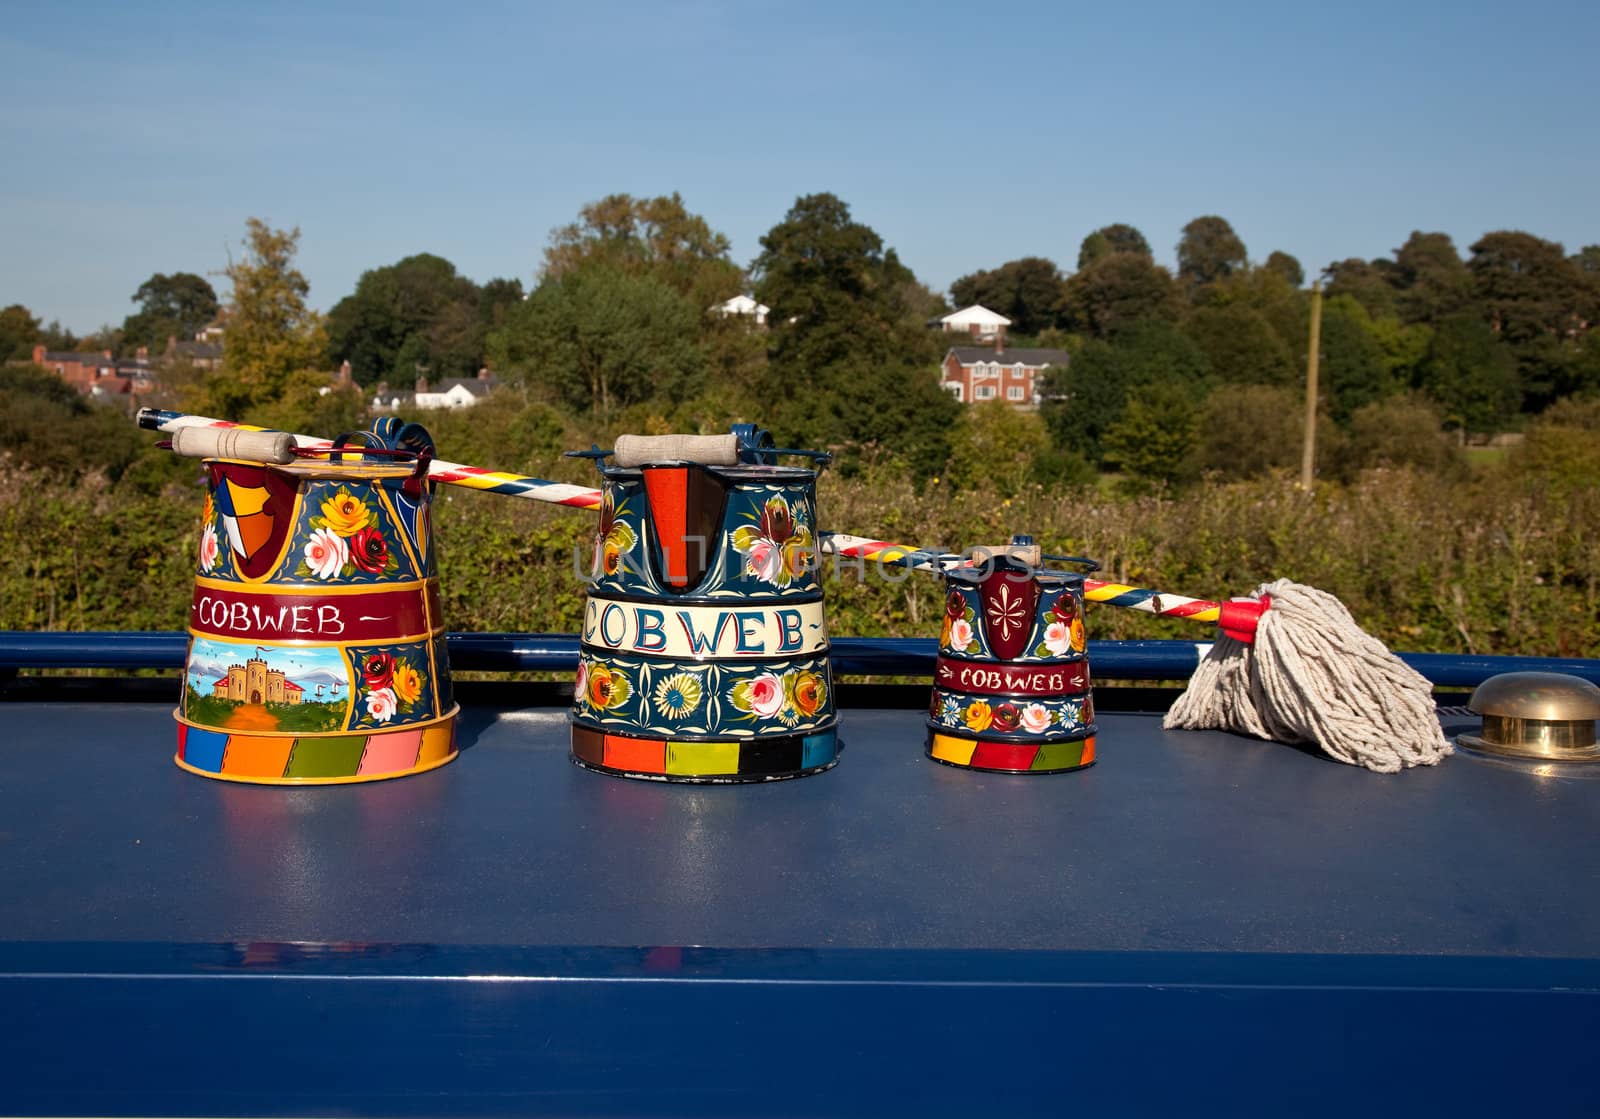 Canal life in England with traditionally decorated tools on display